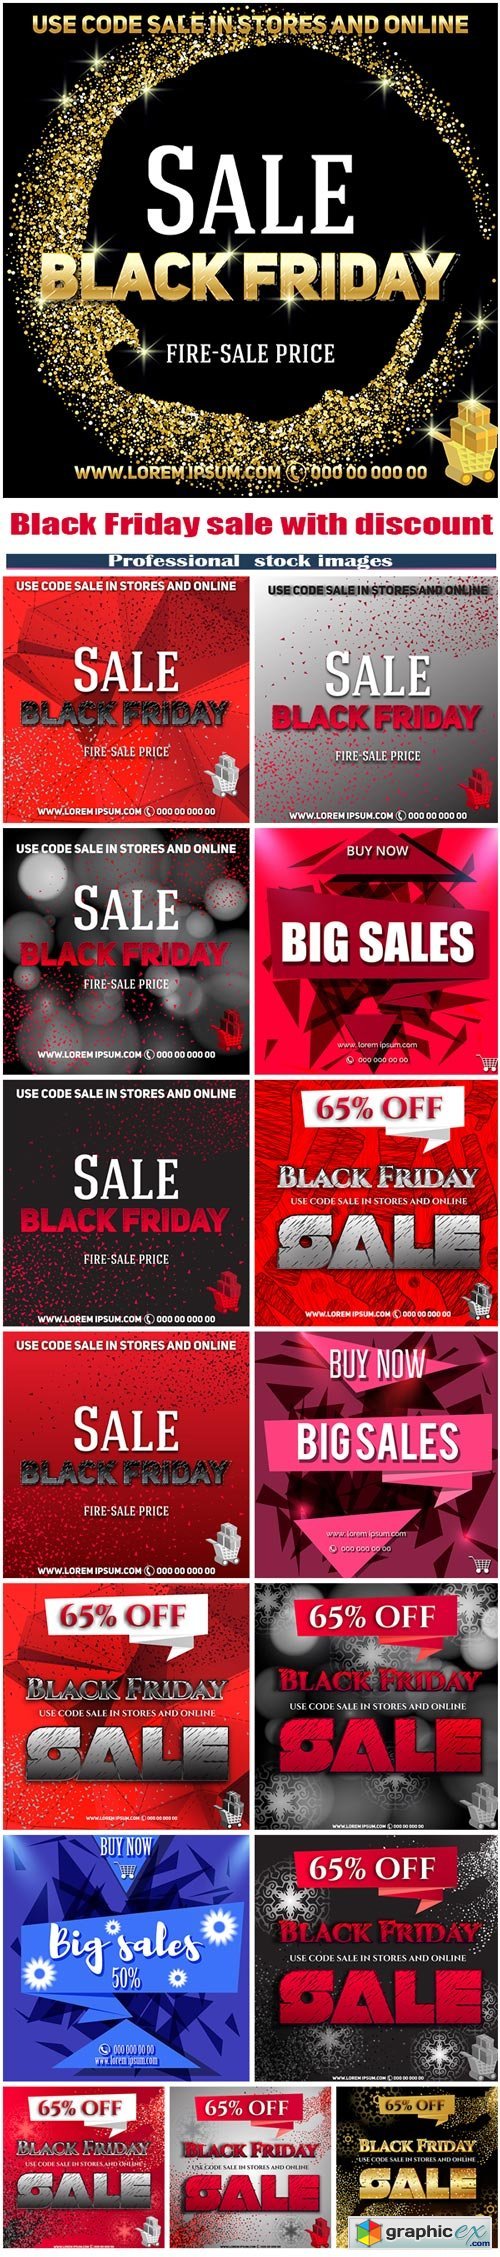 Black Friday sale with discount